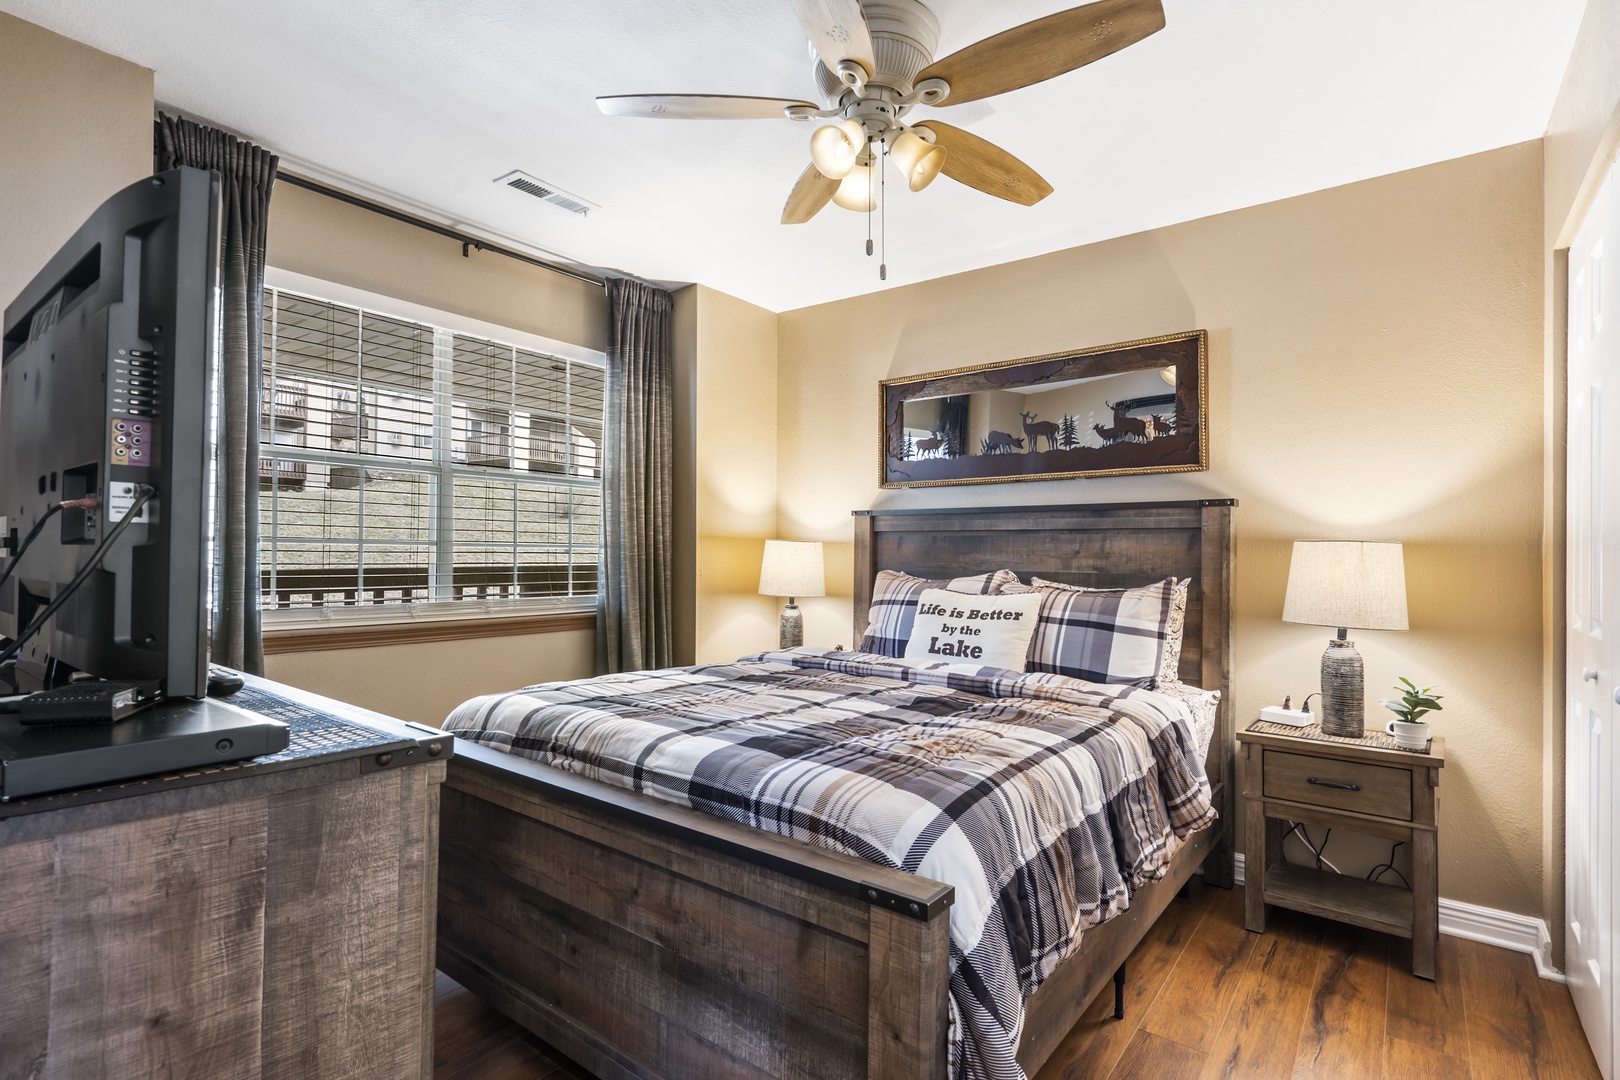 The first bedroom retreat offers a queen-sized bed, ensuite, & Smart TV